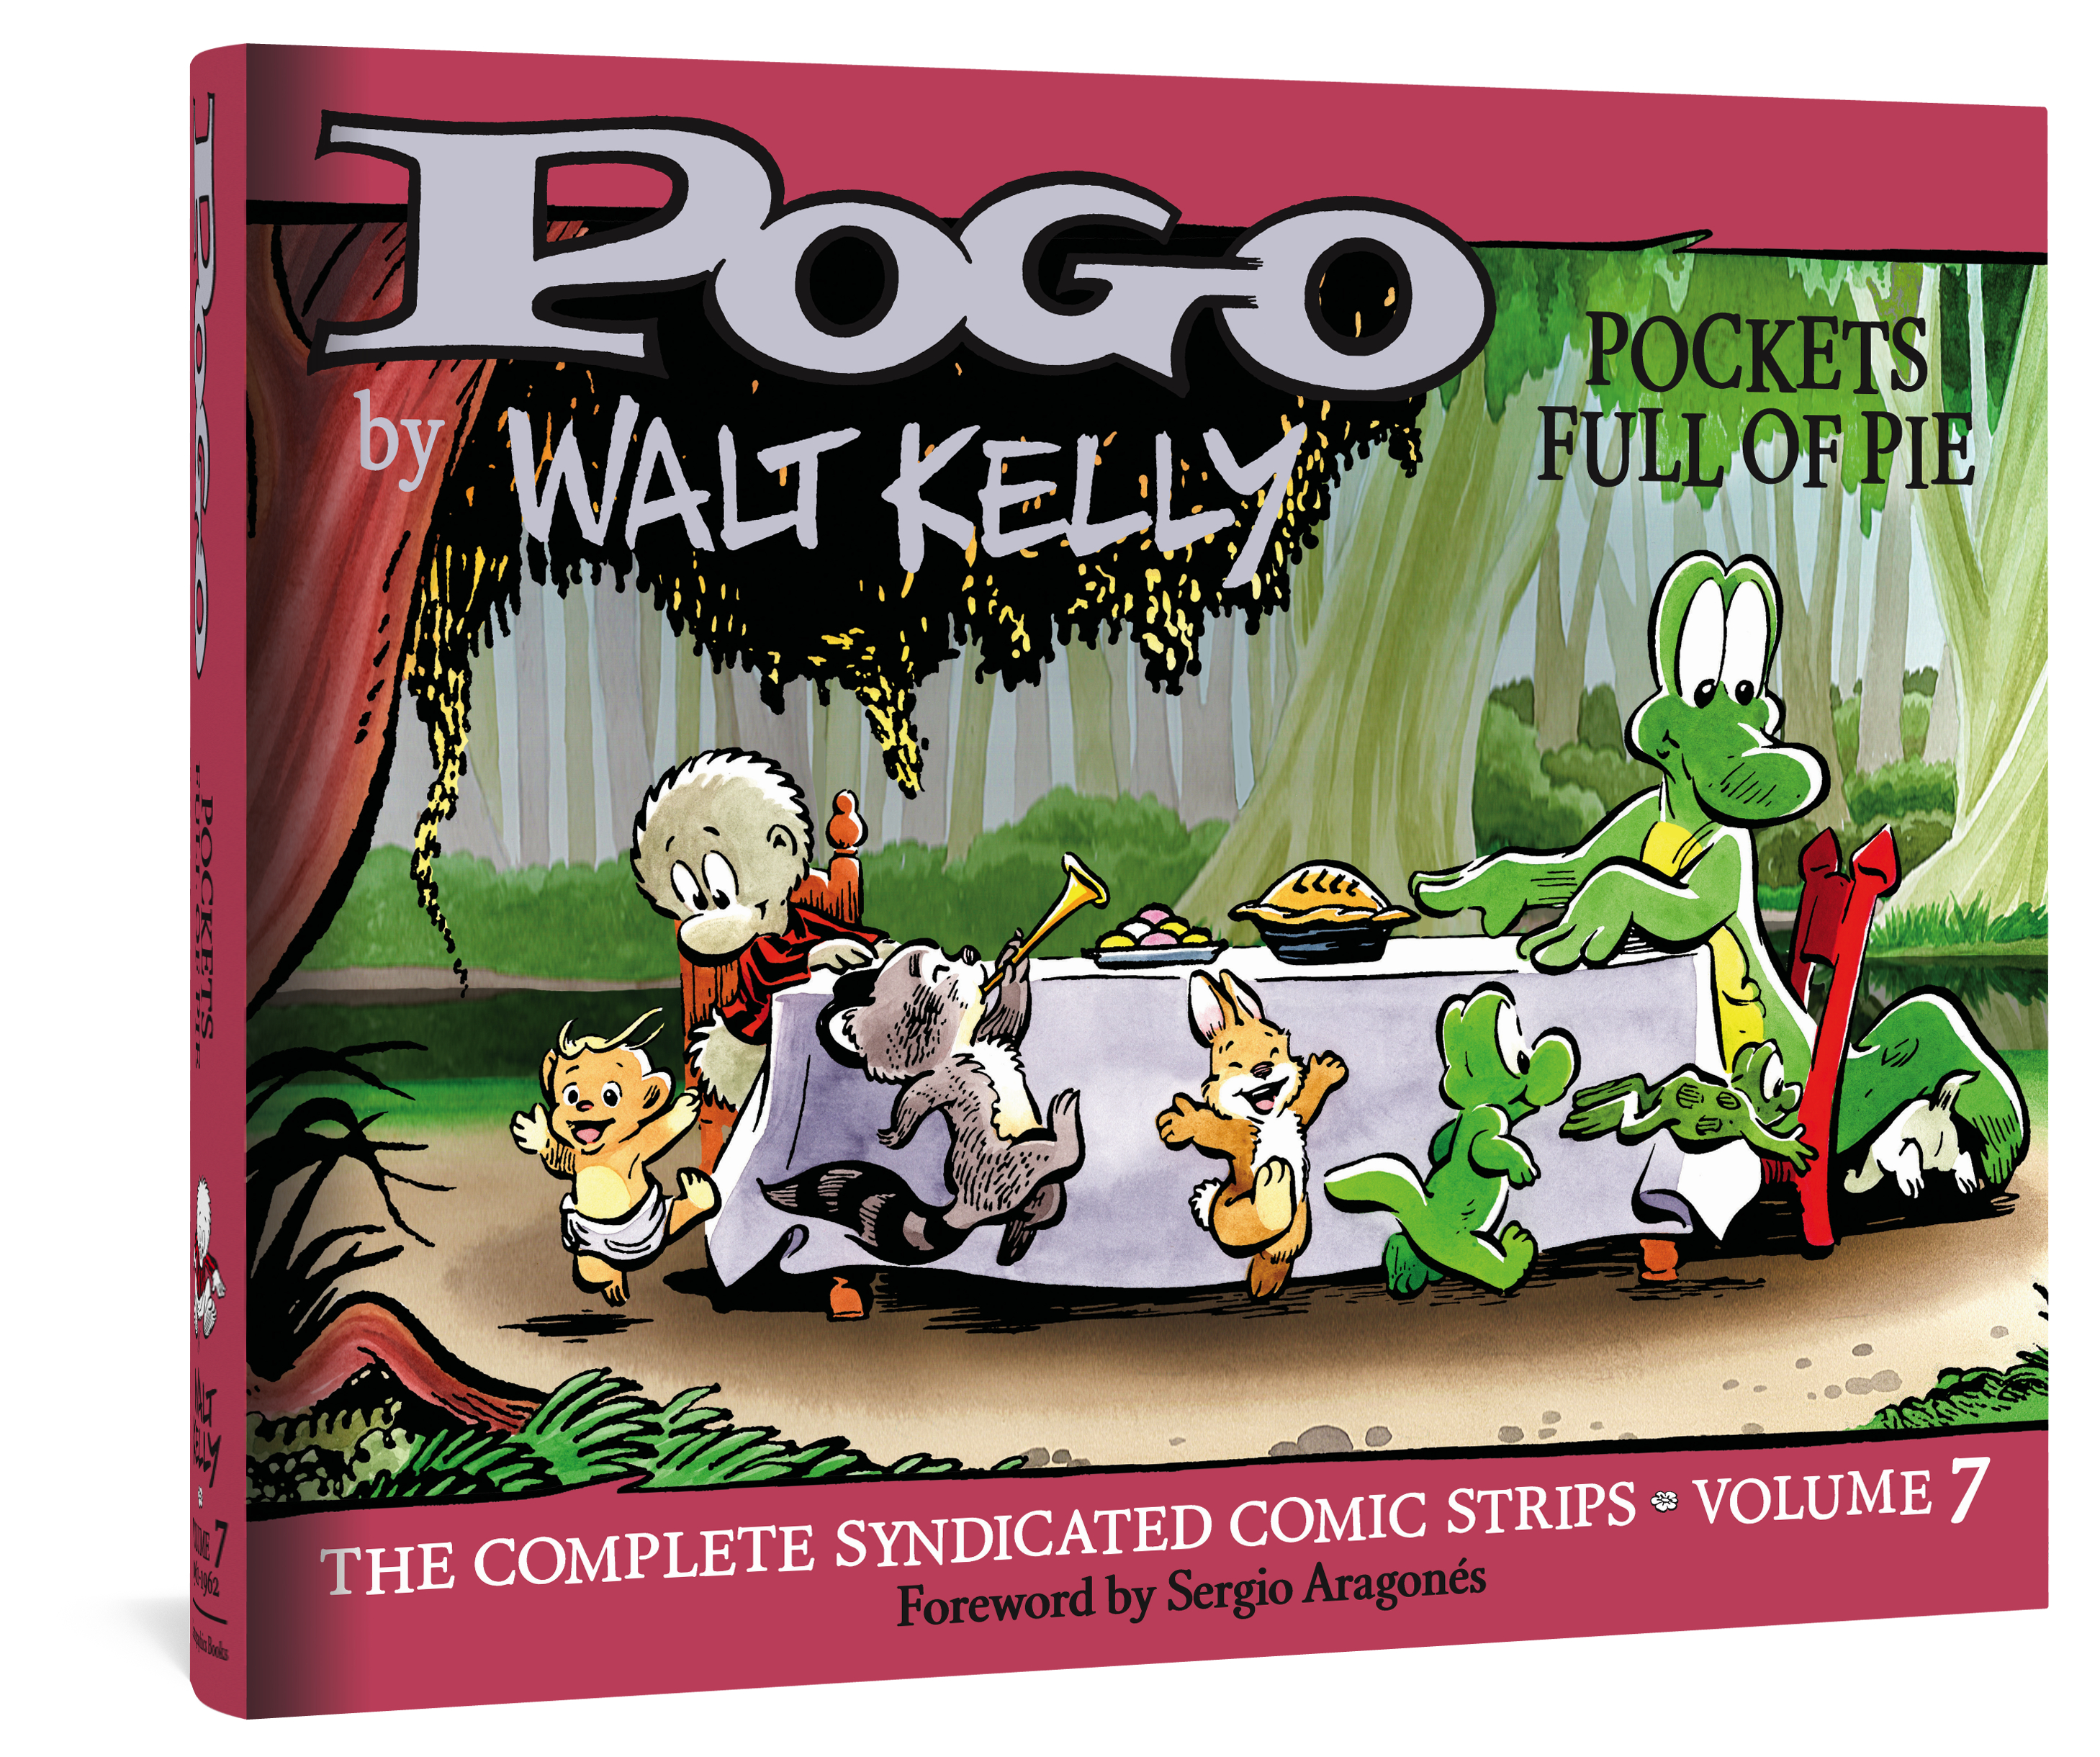 Pogo the Complete Syndicated Strips Hardcover 7 Pockets Full Pie